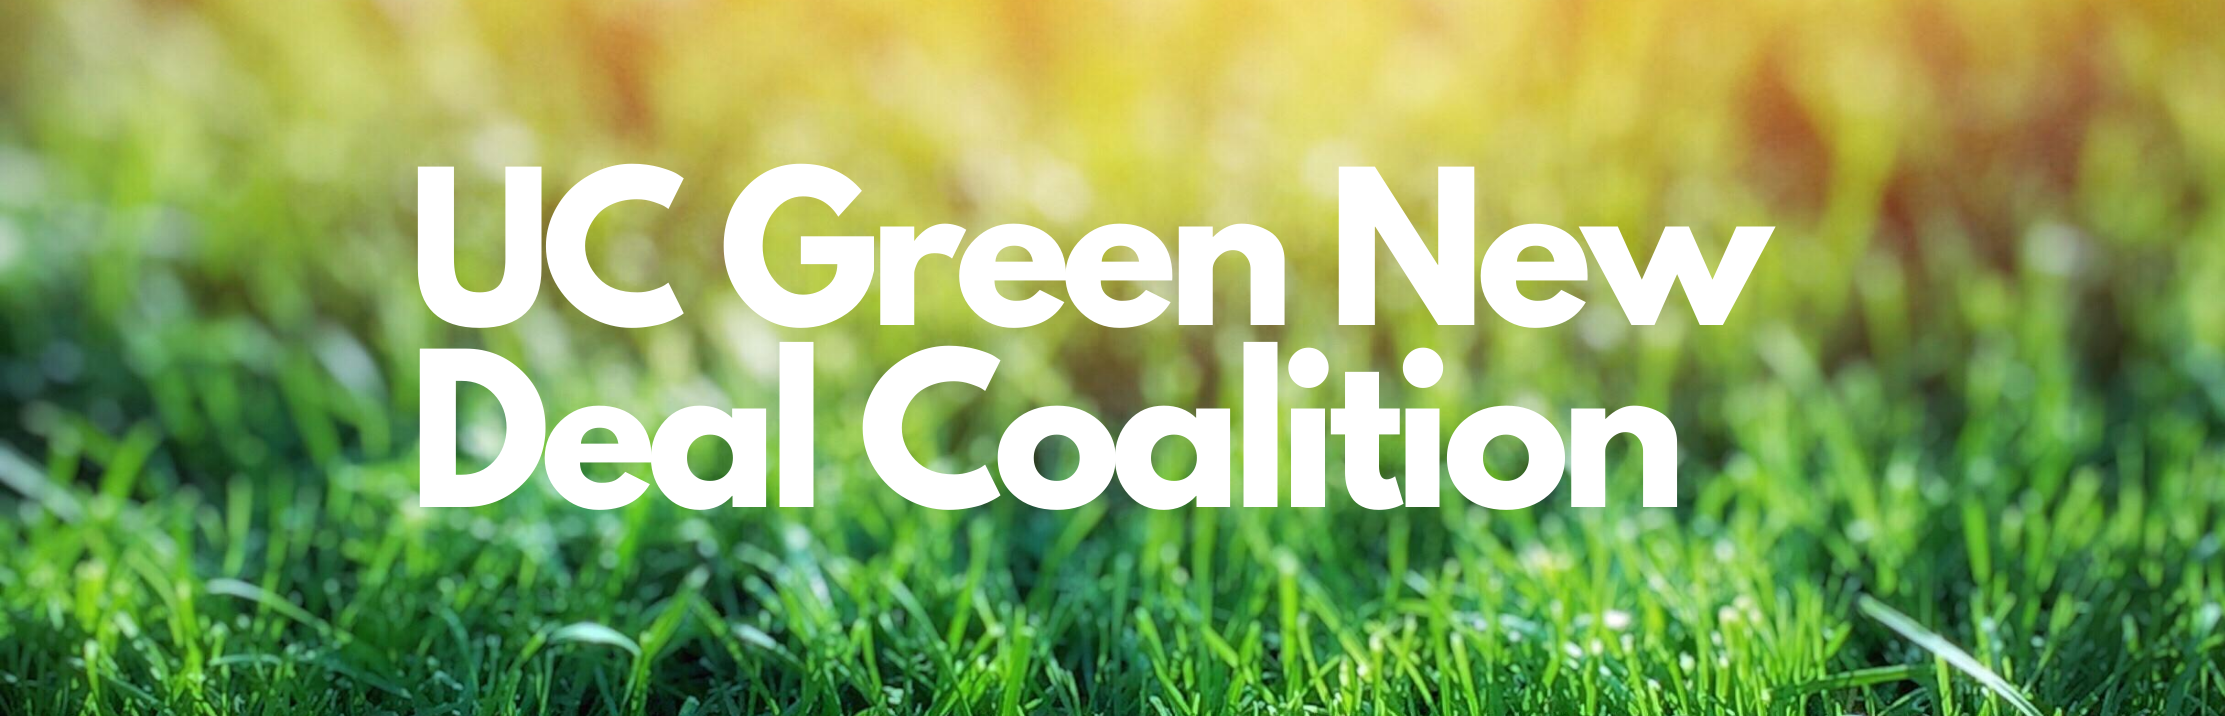 uci green new deal coalition